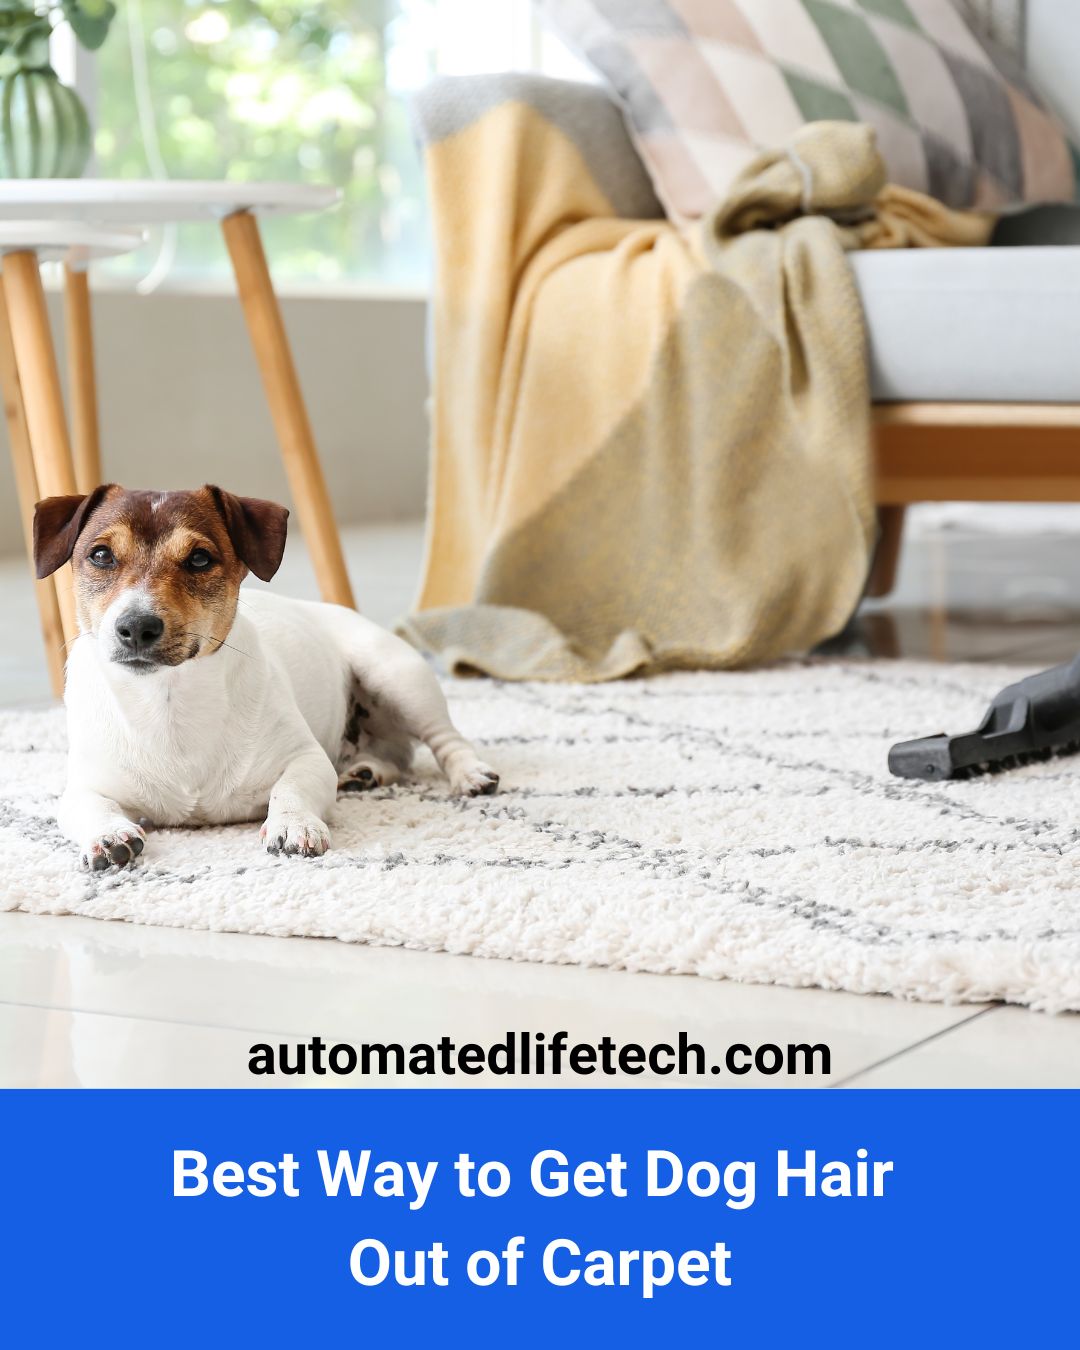 Best Way to Get Dog Hair Out of Carpet